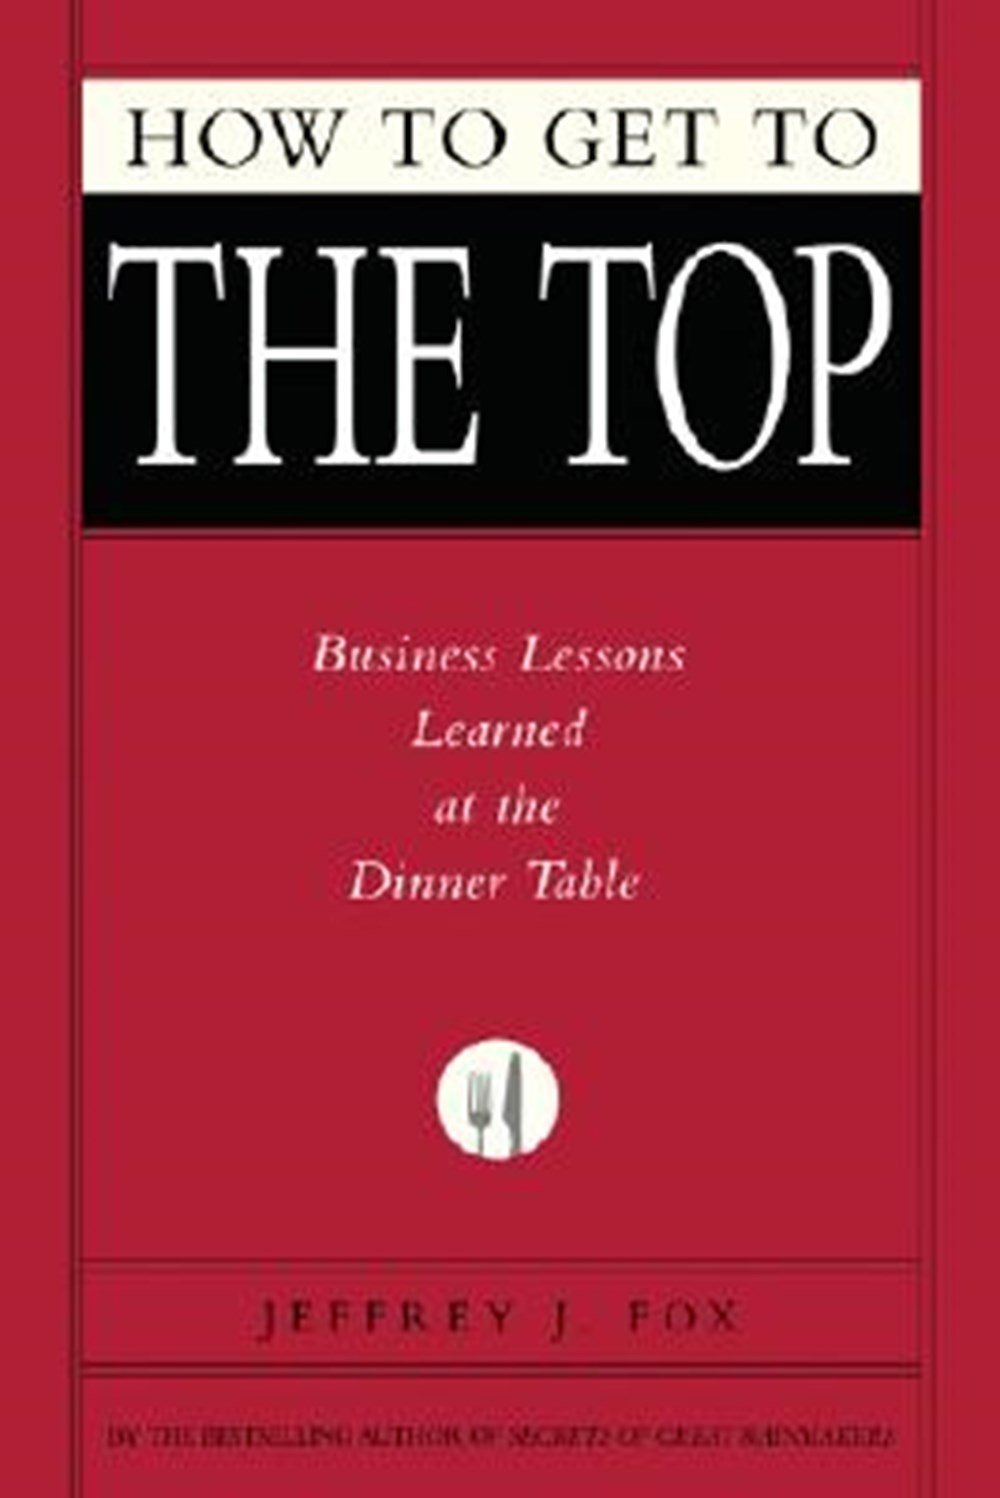 How to Get to the Top Business Lessons Learned at the Dinner Table